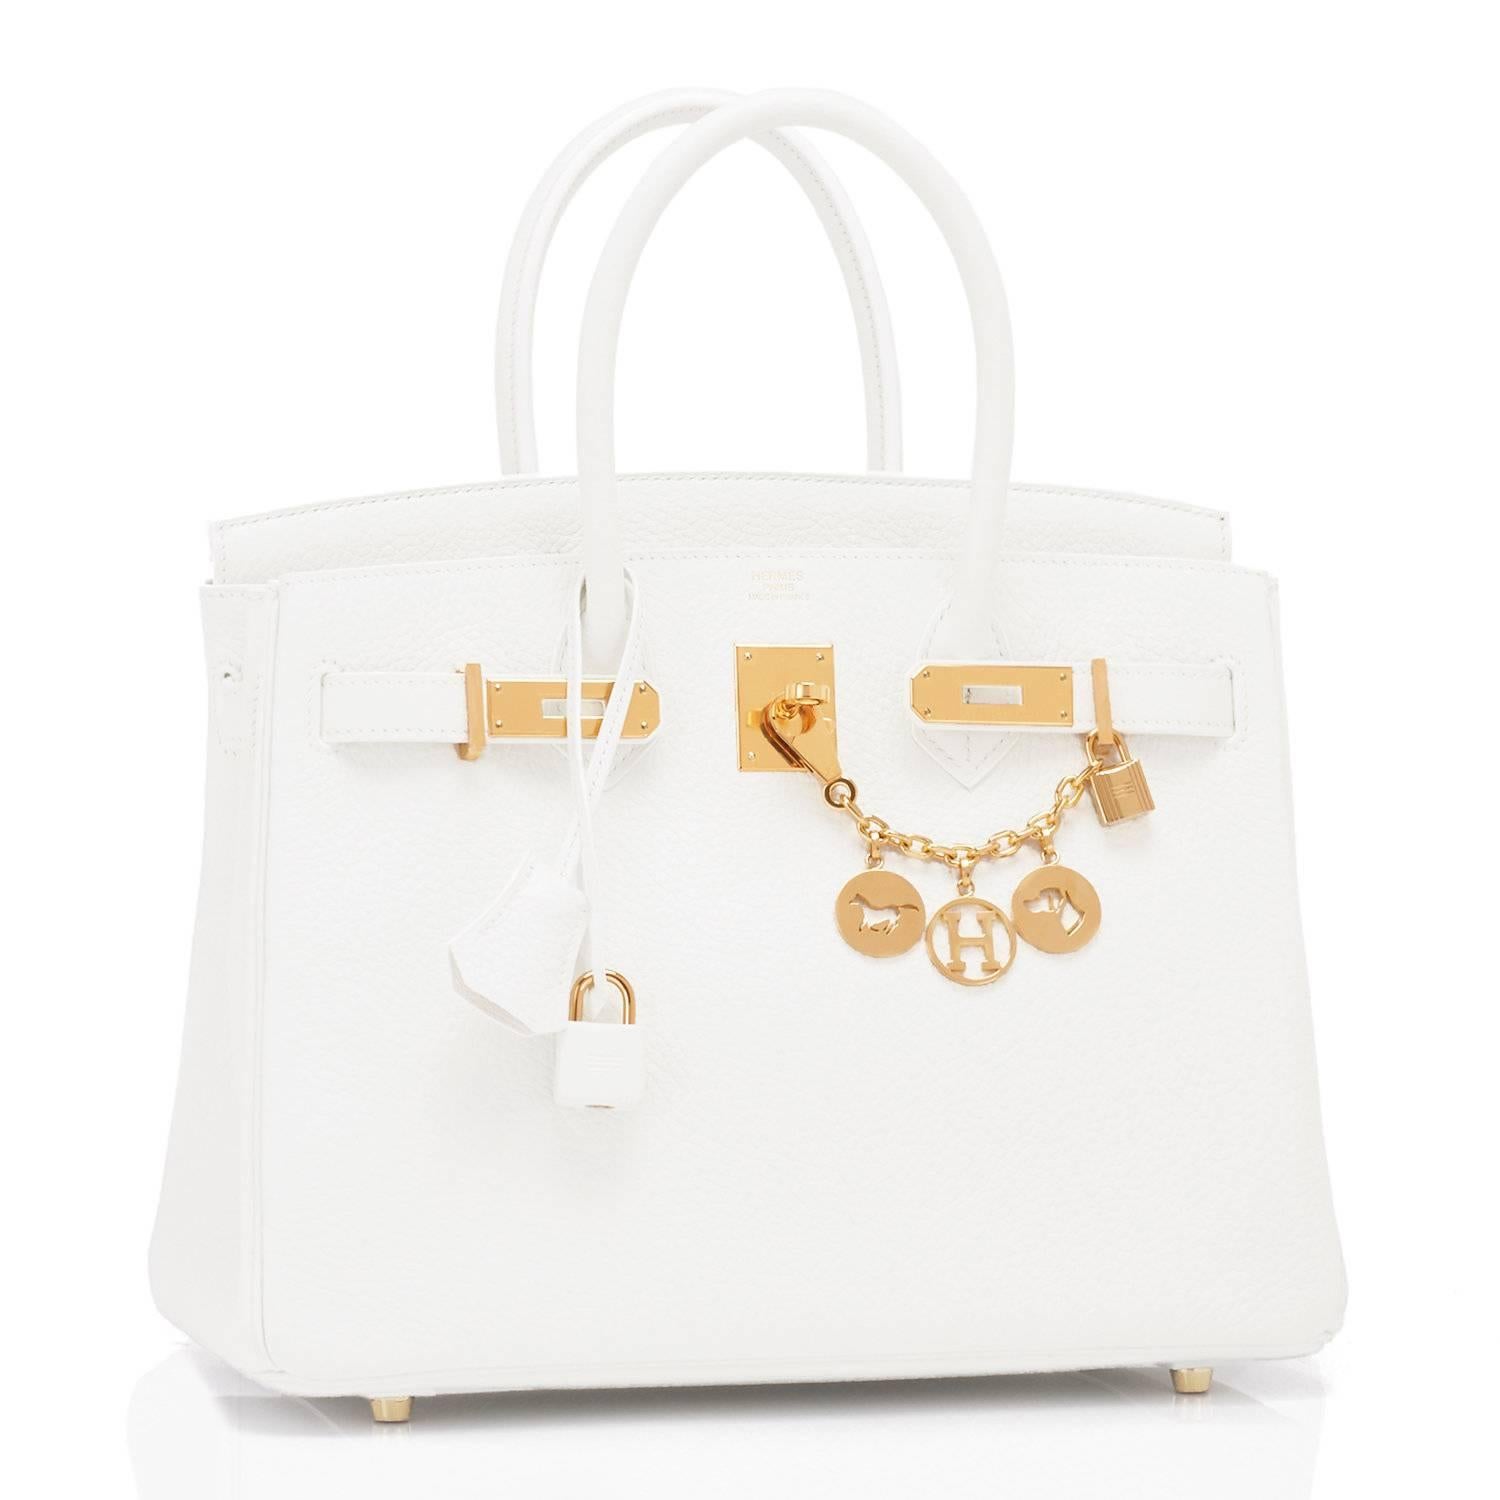 Hermes White Birkin Birkin 30cm Bag Gold Hardware
Extremely rare find in Brand New in Box condition.  
Do not miss this rare find as white Birkins have been discontinued from Hermes production for several years.
Brand New in Box.  Store fresh.